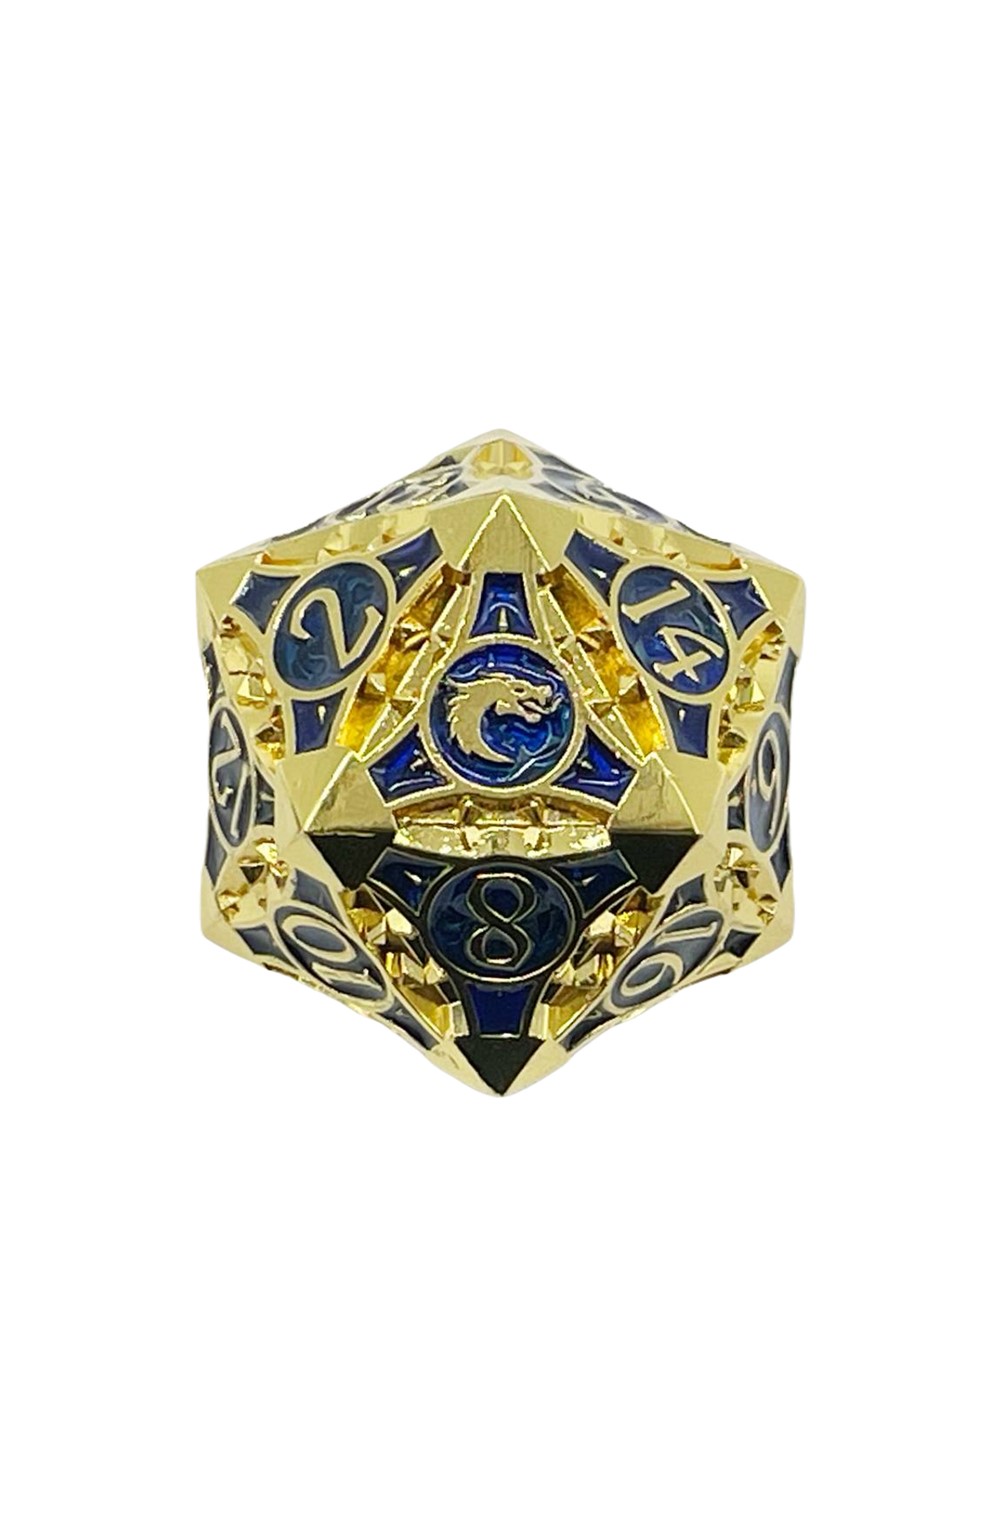 Old School 40Mm D20 Metal Die: Gnome Forged - Gold W/ Blue